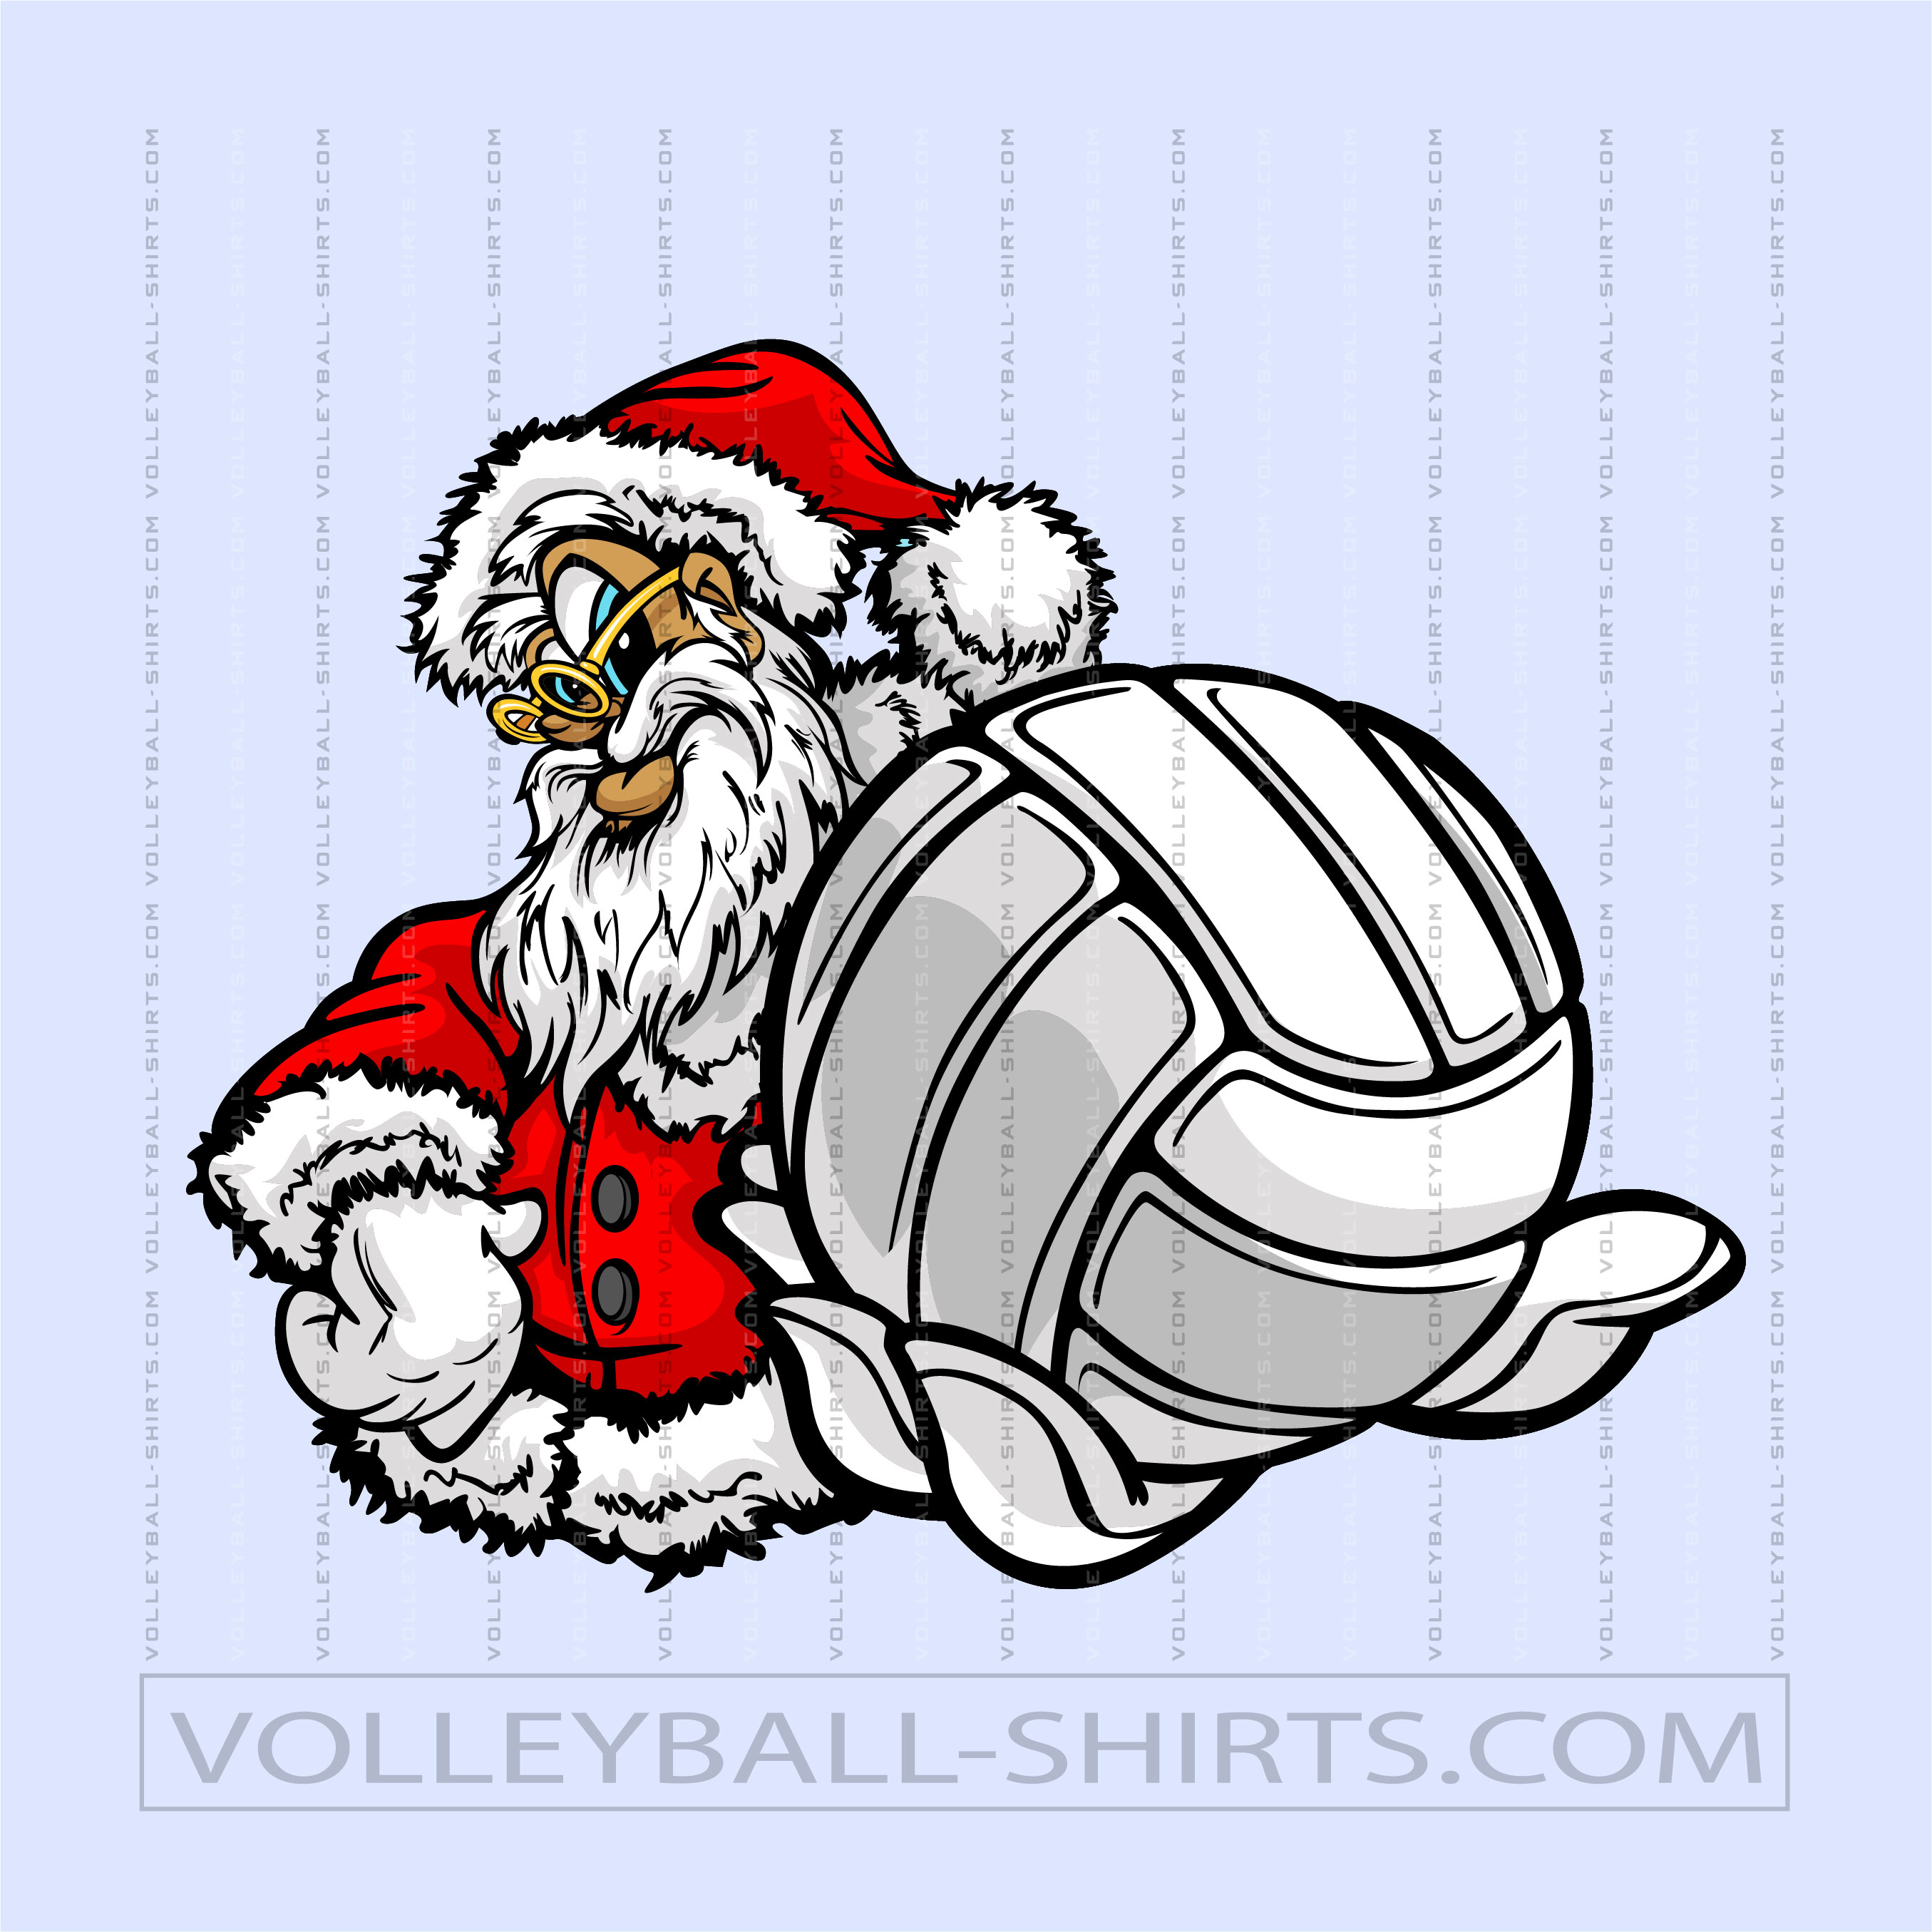 Volleyball Christmas Images